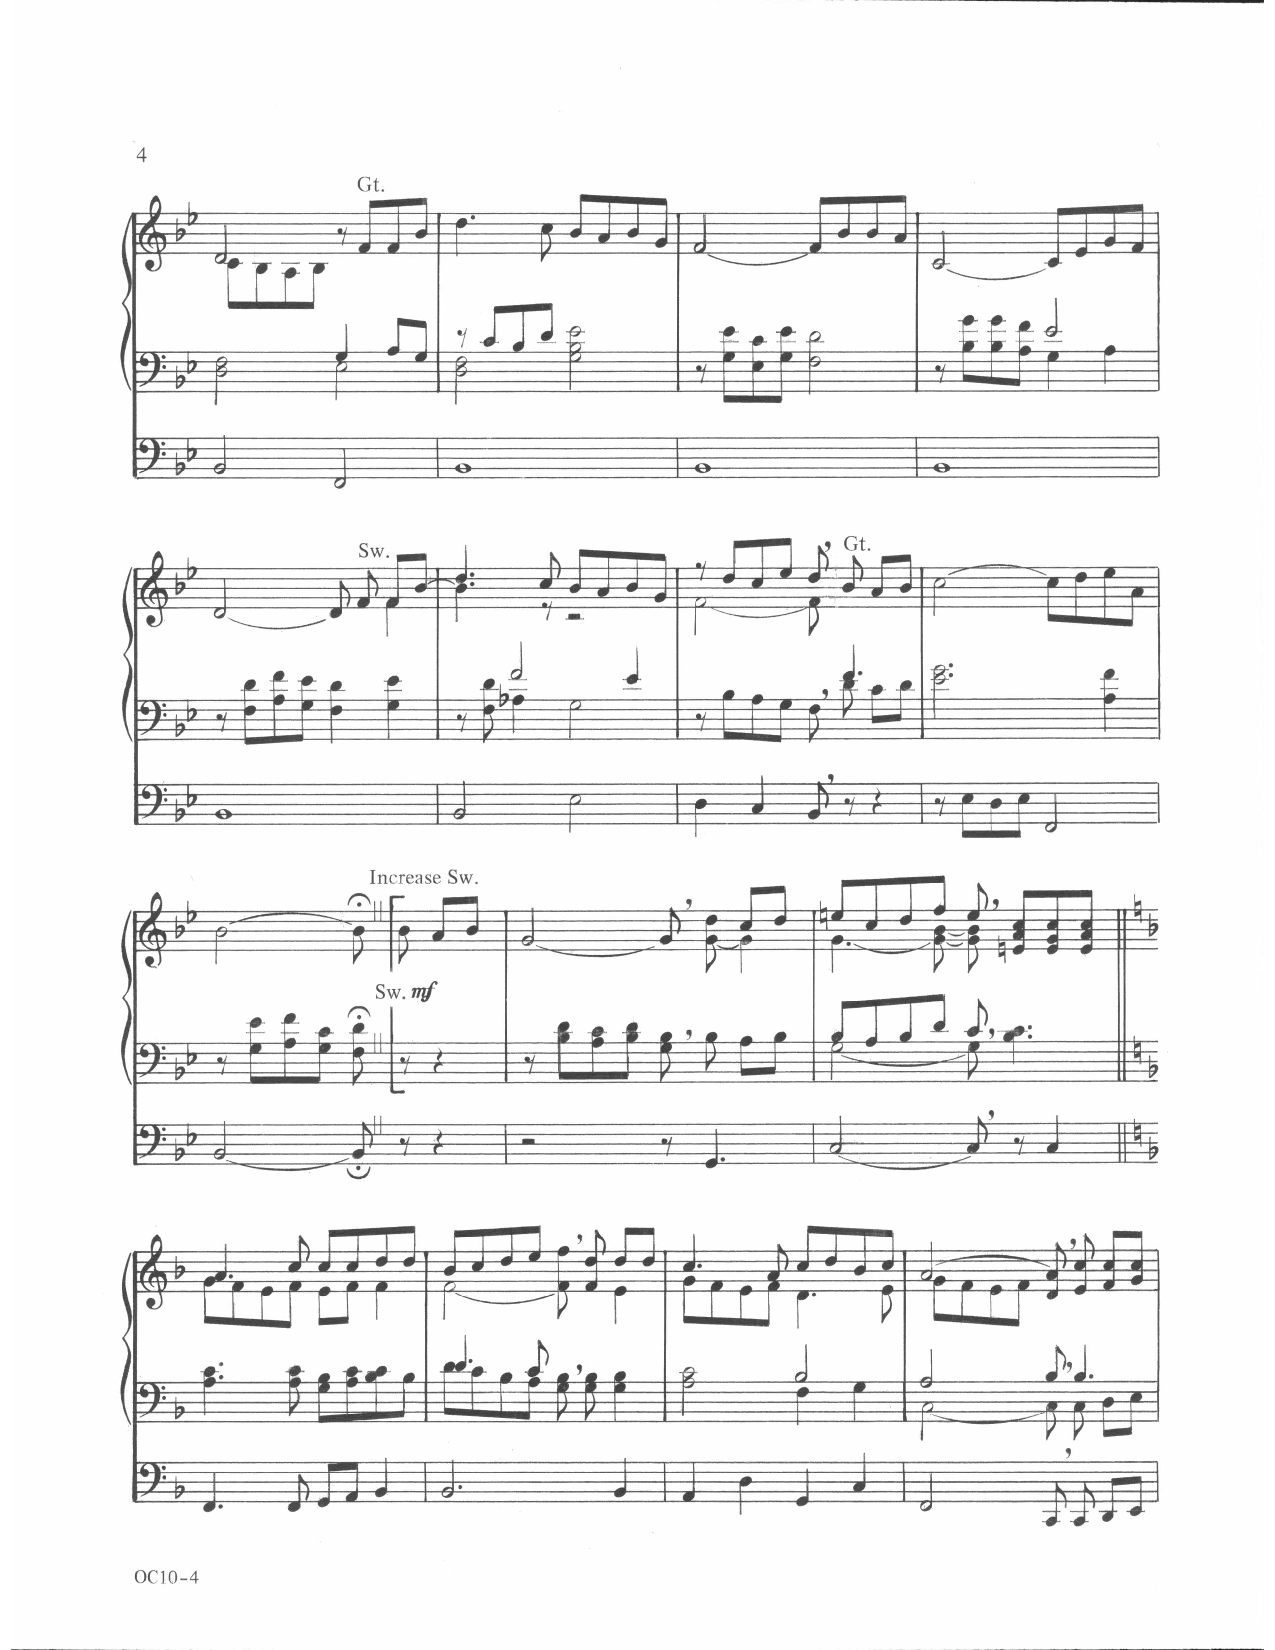 How Great Thou Art - Prelude for Organ Sheet music for Organ (Solo